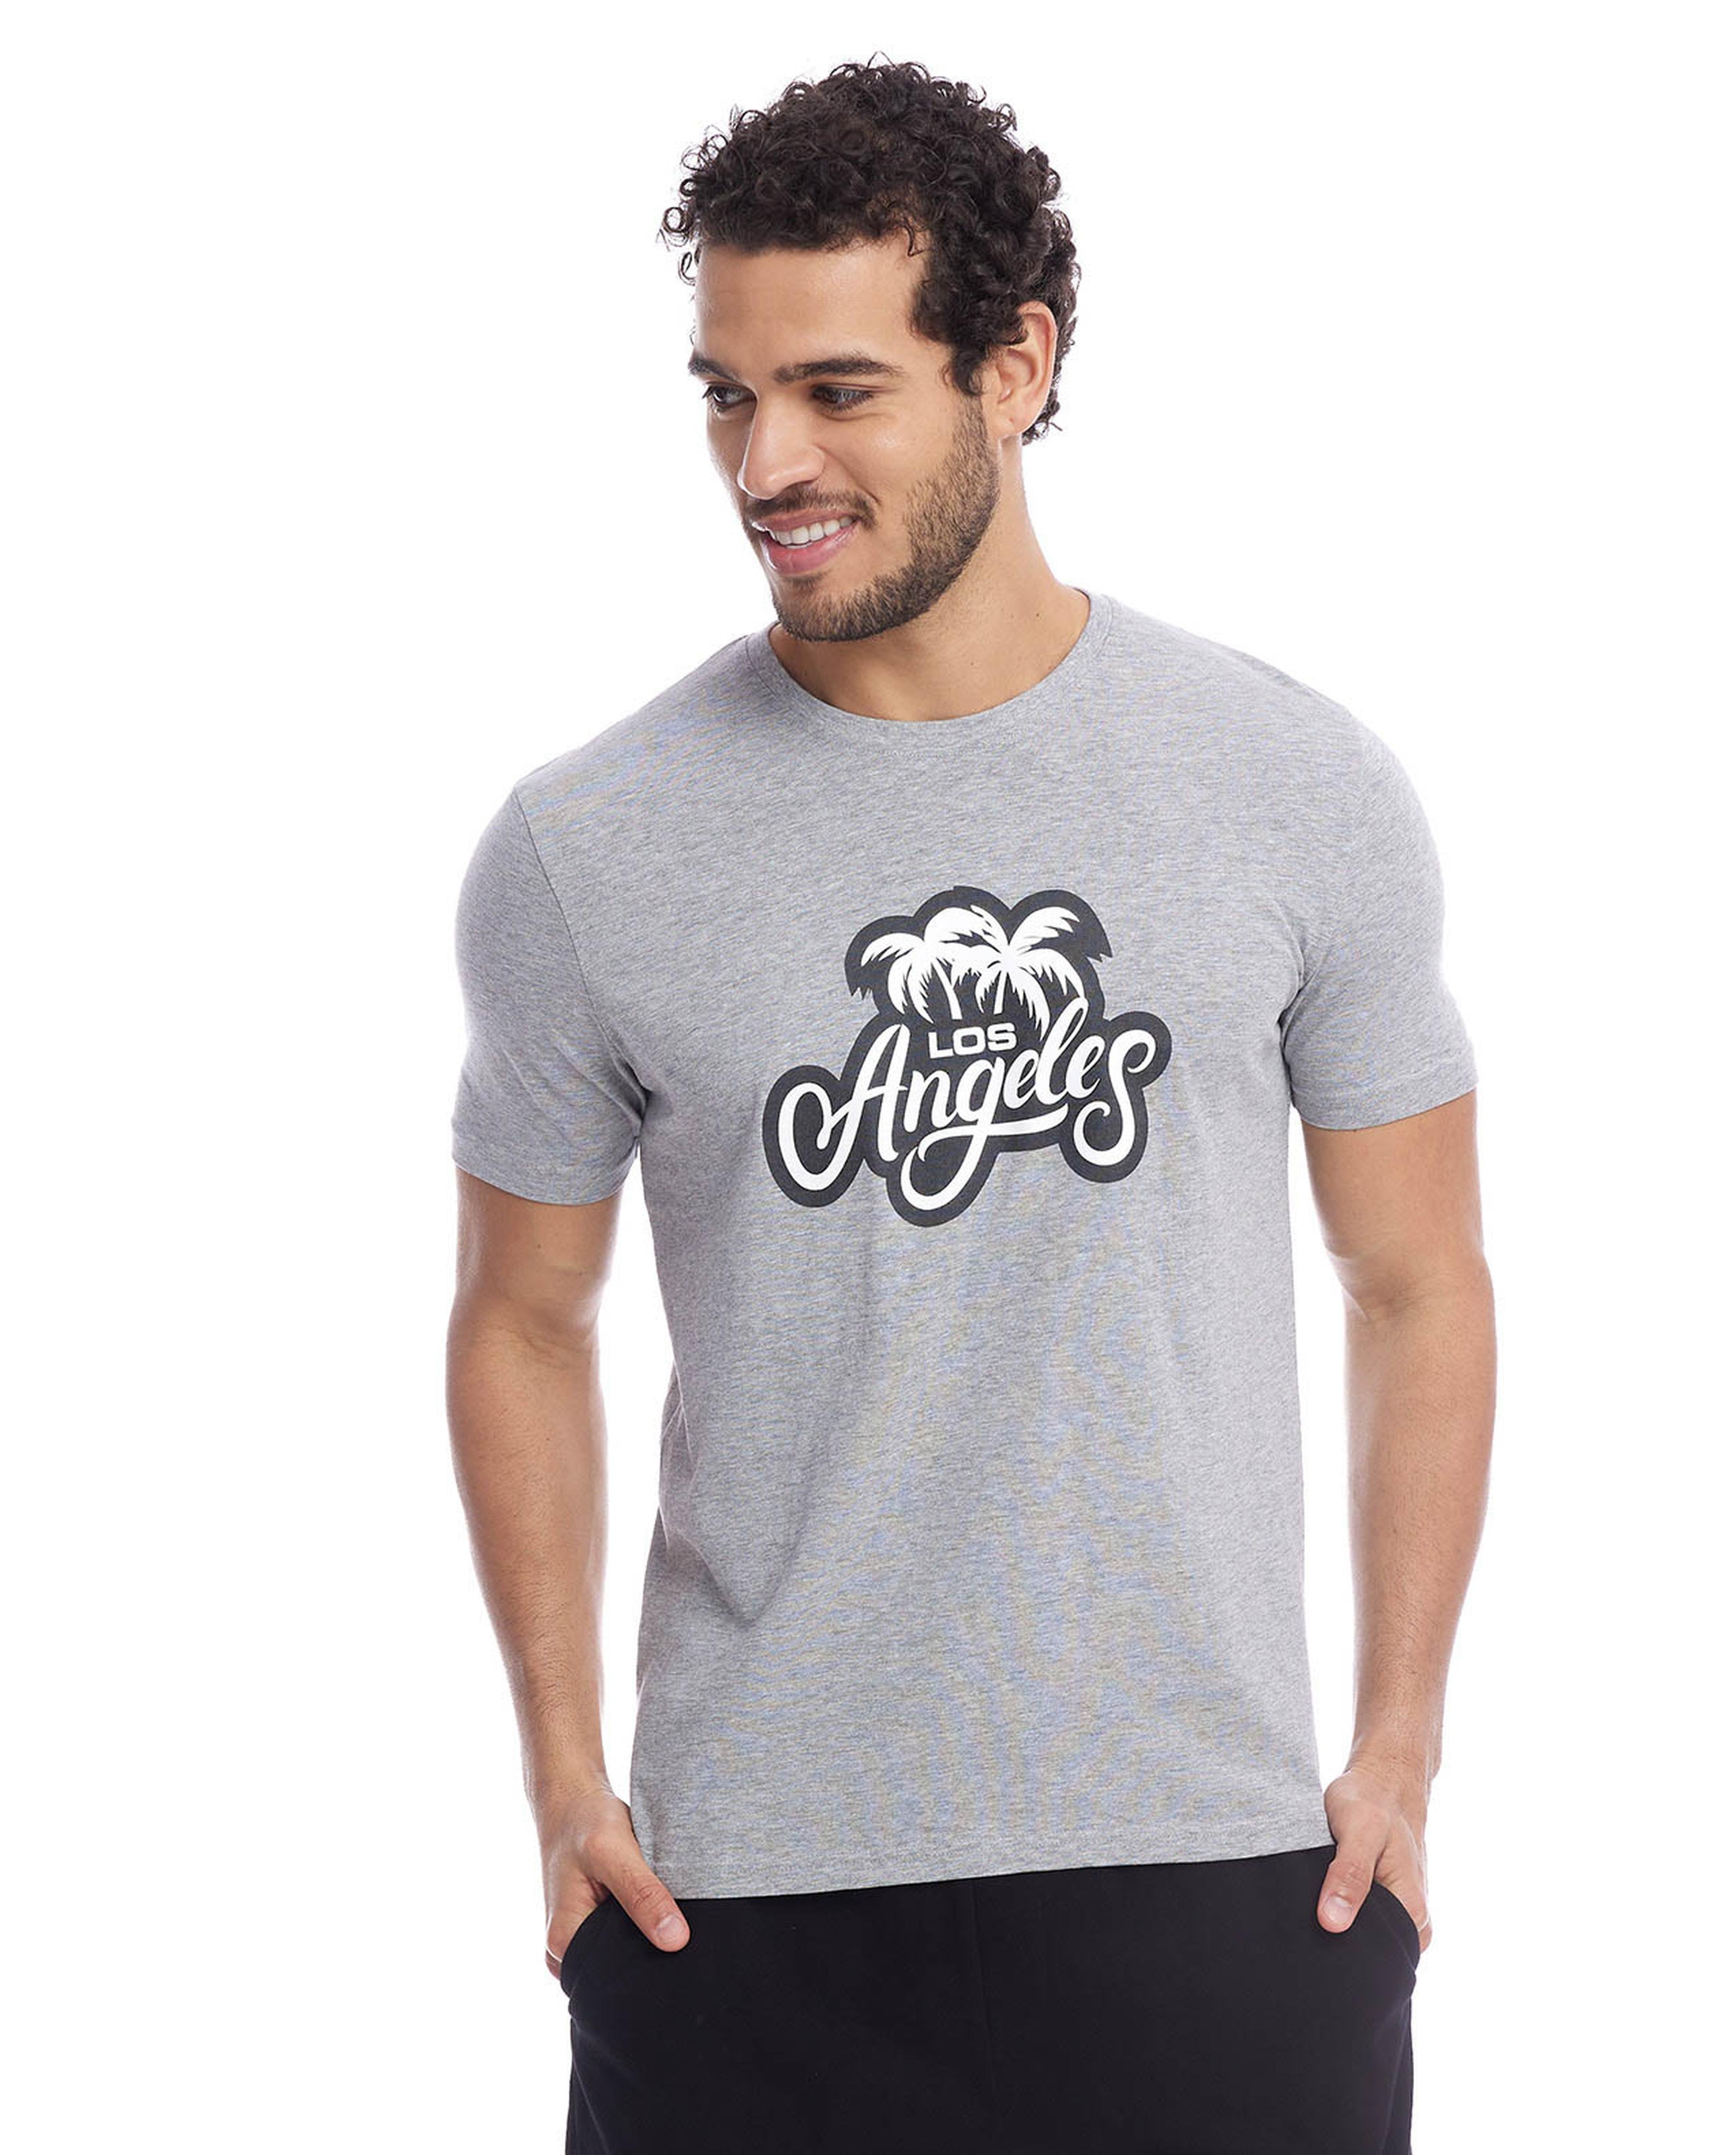 Graphic Print T-Shirt with Crew Neck and Short Sleeves